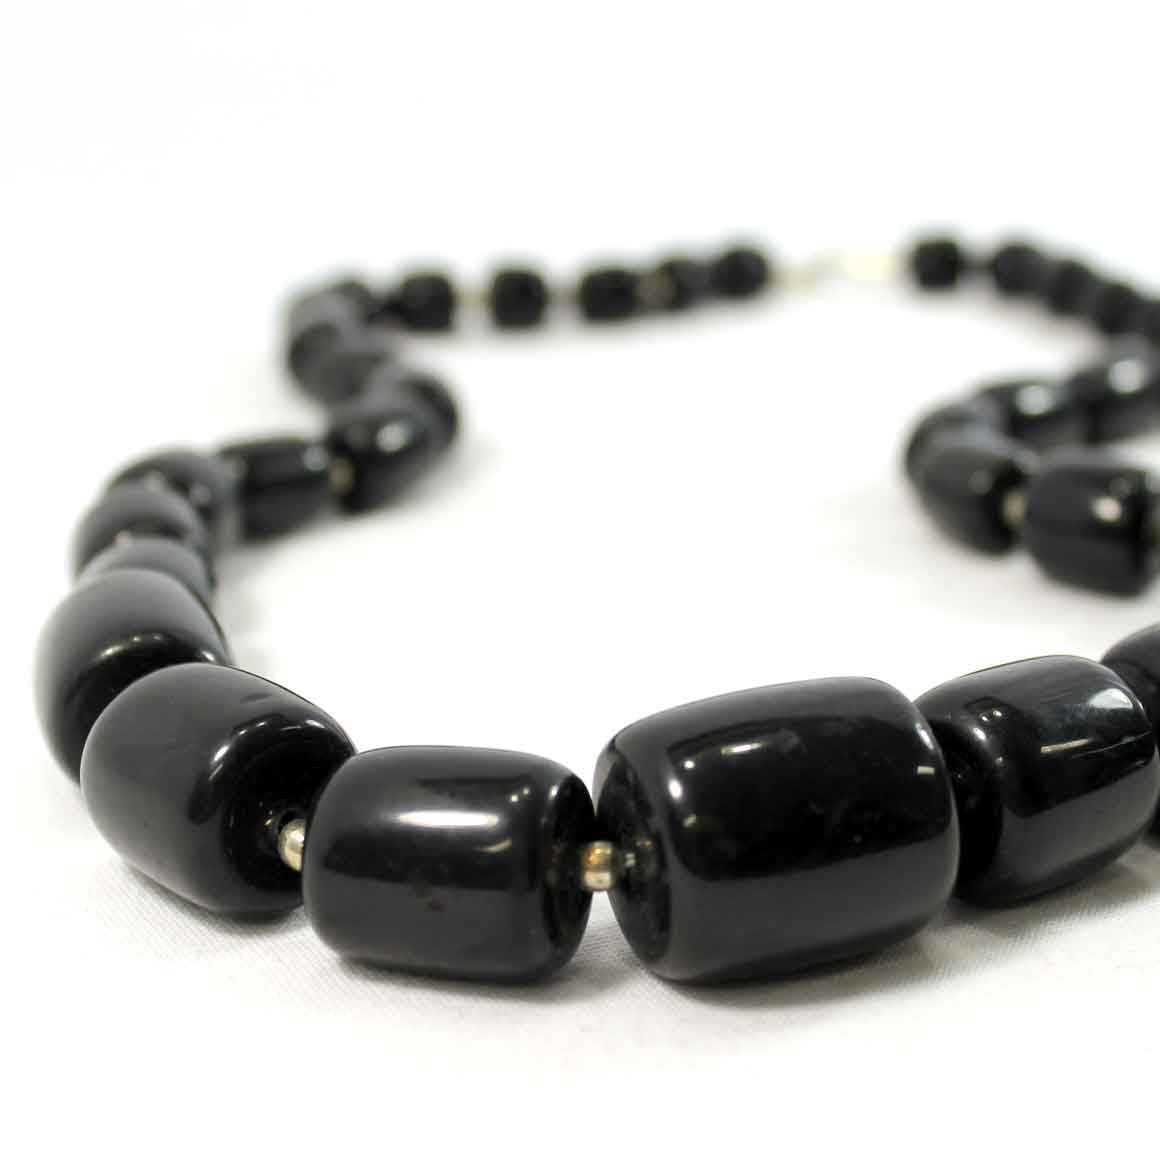 Fair Trade Ethical Black Olive Resin Necklace